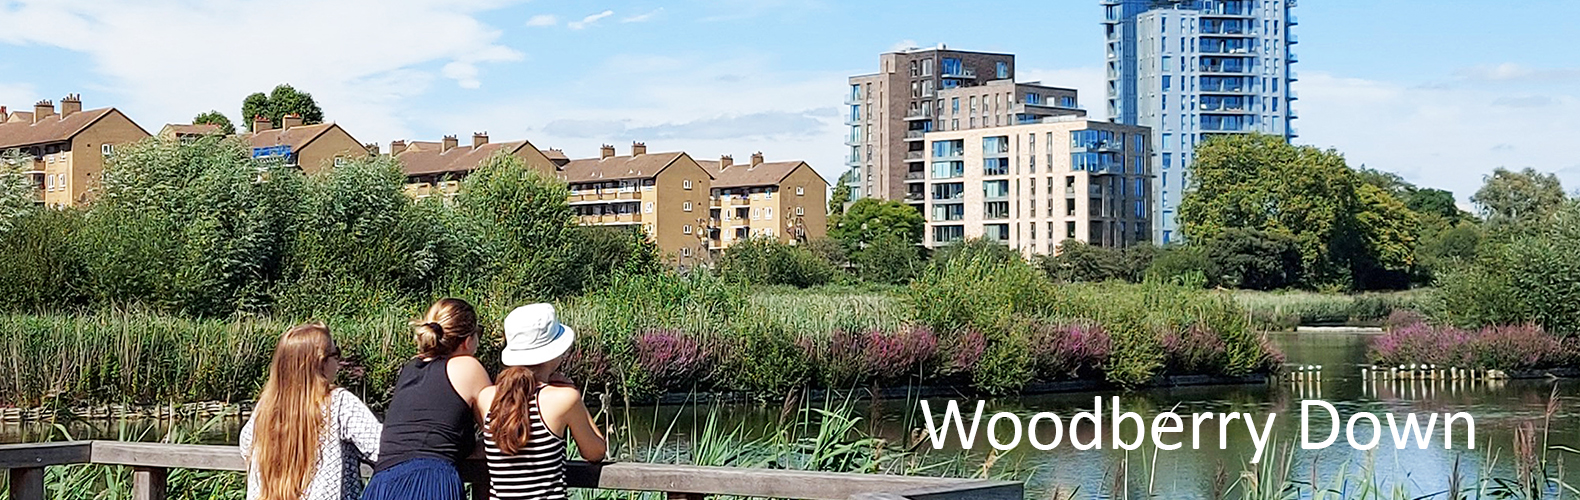 Woodberry Down London N4 area guide